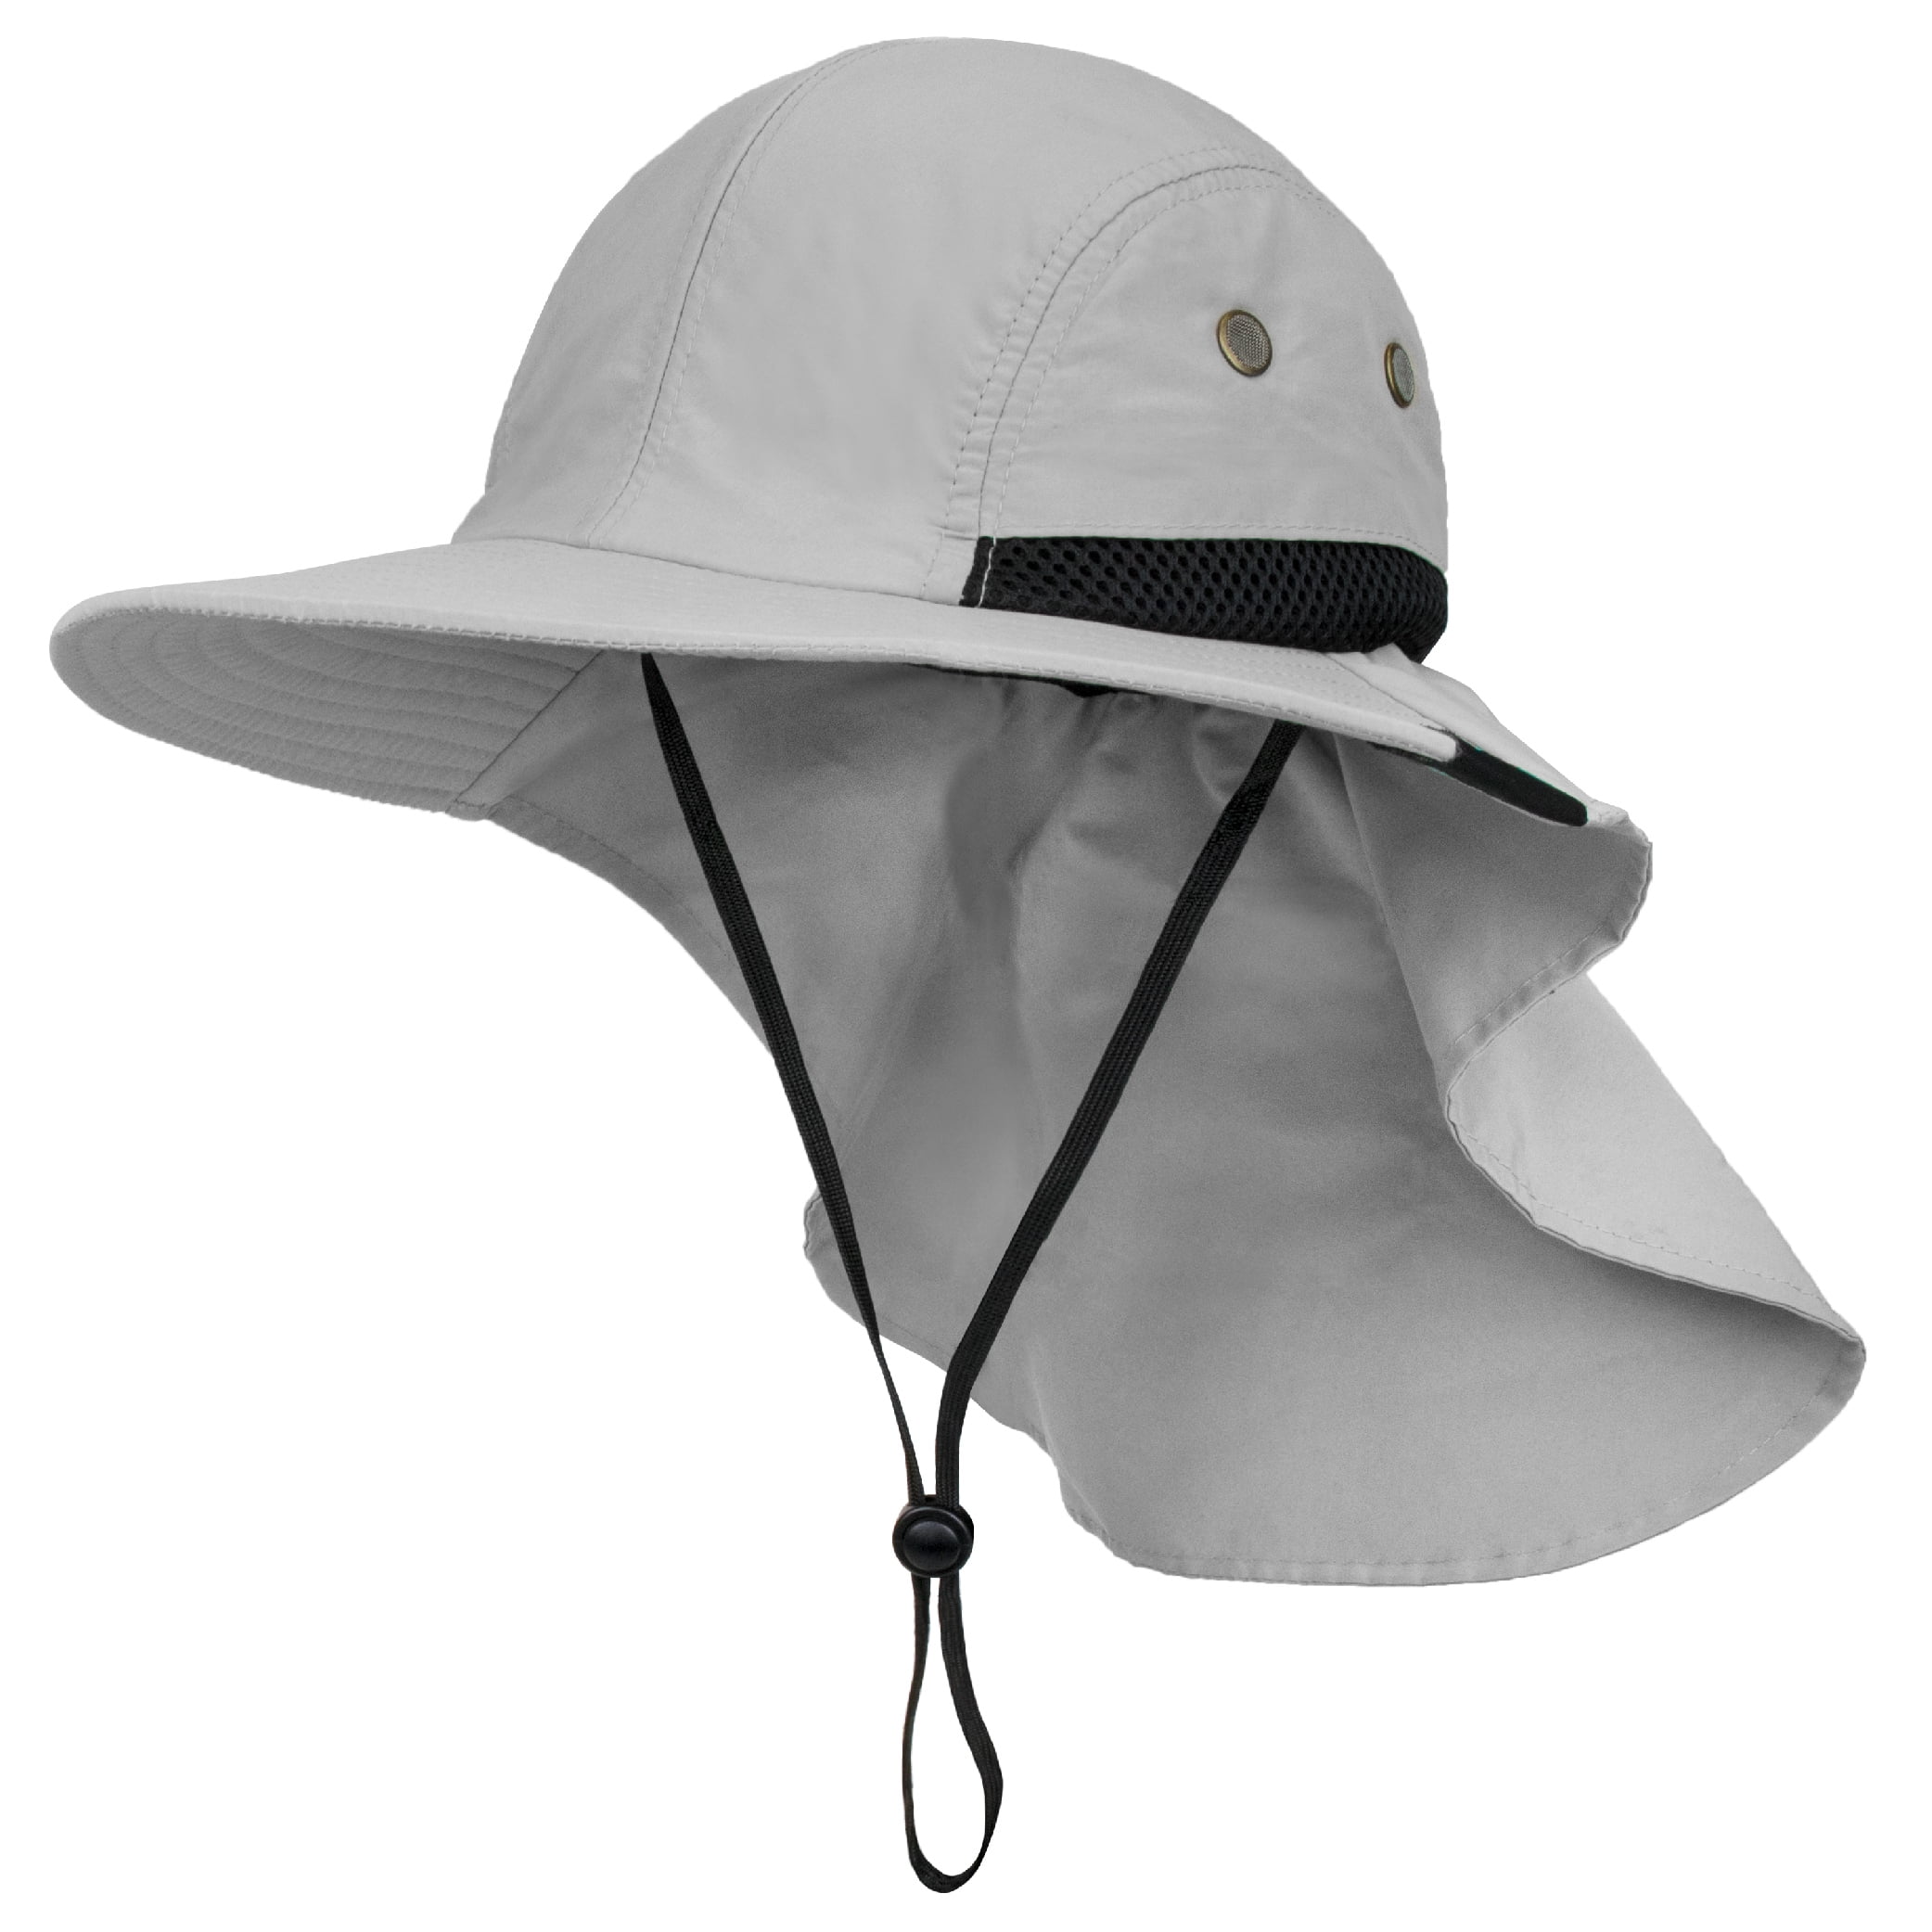  icolor Folding Sun Cap Fishing Hats Summer Outdoor Sun  Protection Travel Beach Hat w/UPF 50+ Neck & Face Flap Cover for Men Women  Army Green : Sports & Outdoors